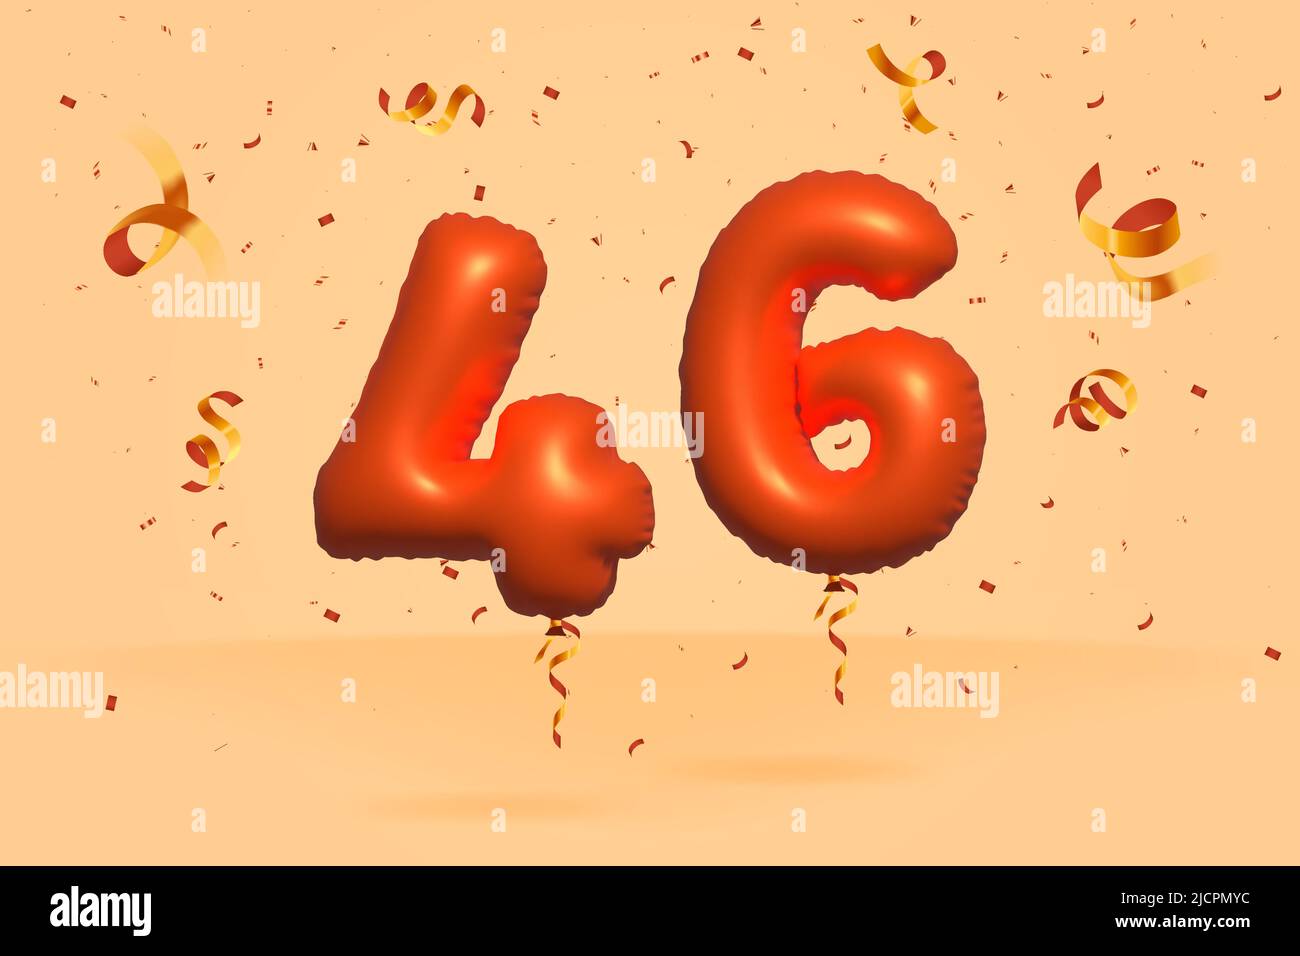 3d number 46 Sale off discount promotion made of realistic confetti Foil 3d Orange helium balloon vector. Illustration for selling poster, banner ads, Stock Vector